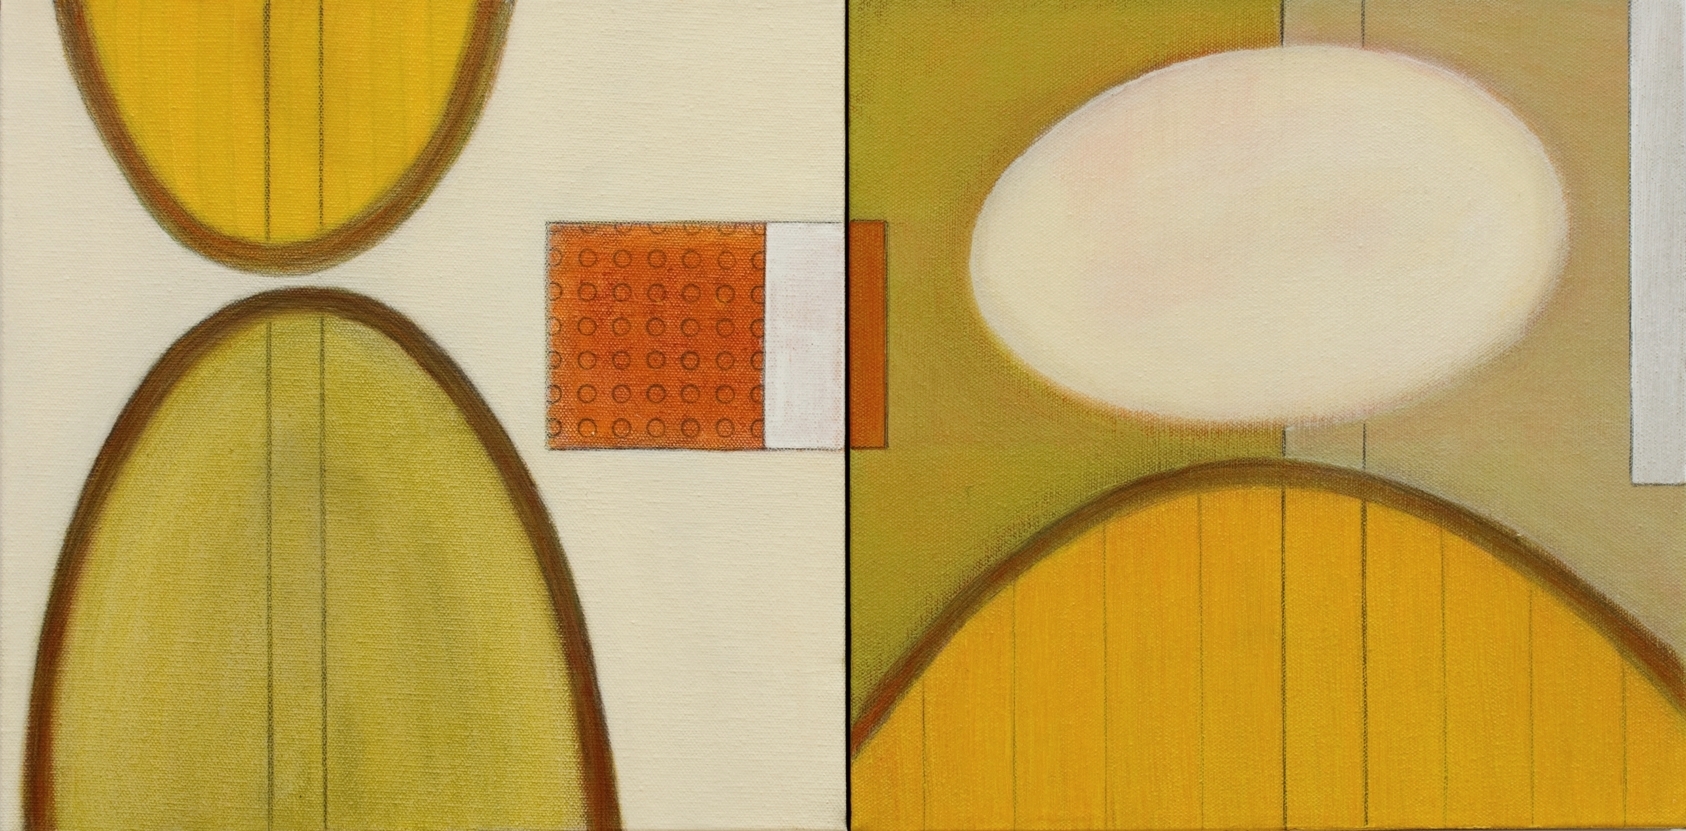  Hovering Ovoid  12 x 24 Diptych  SOLD   